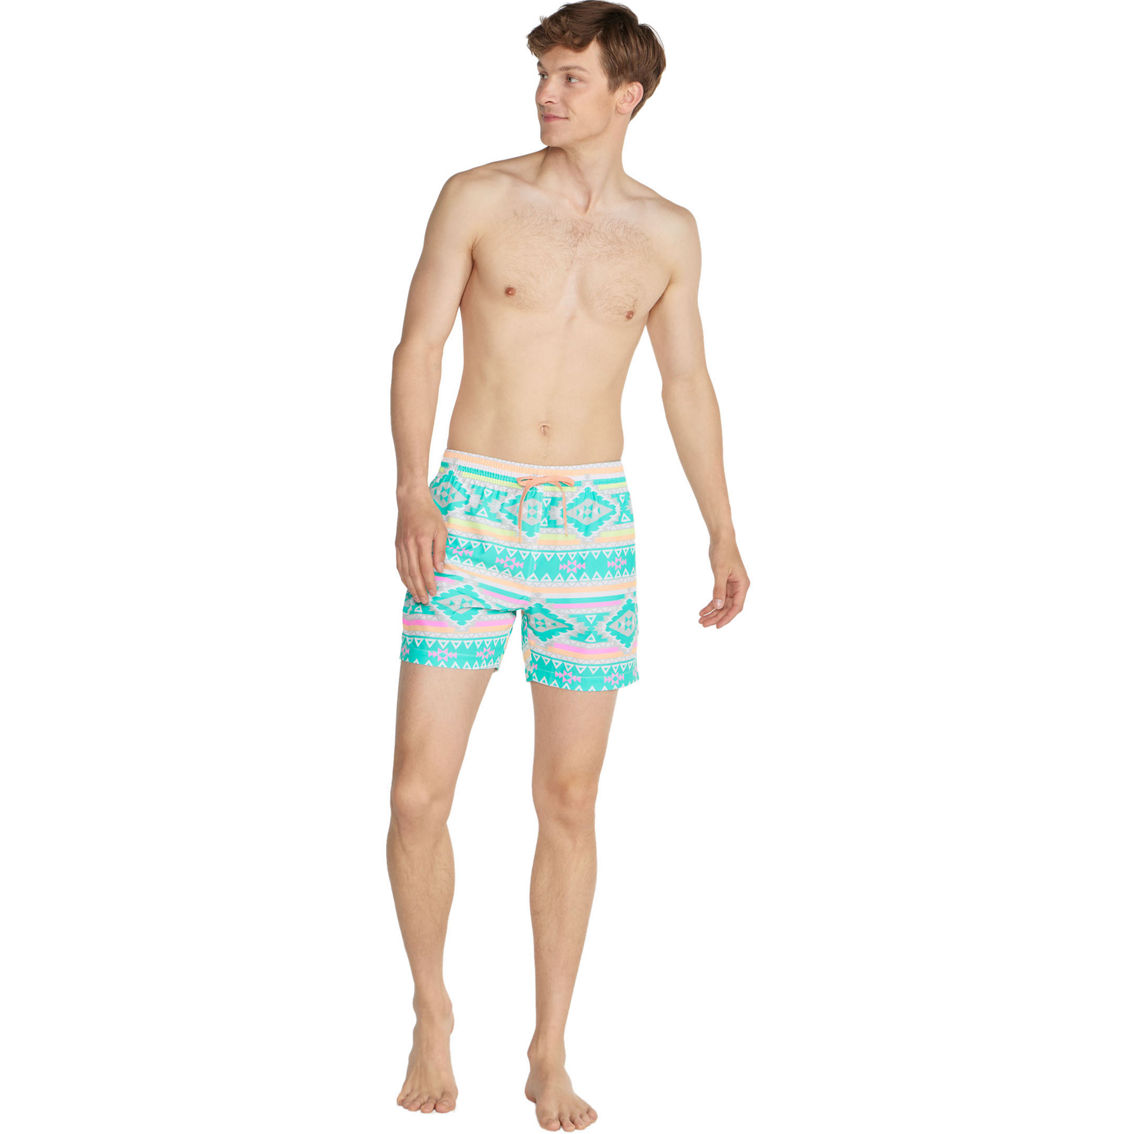 Chubbies The En Fuegos 5.5 in. Lined Classic Swim Trunks - Image 6 of 6